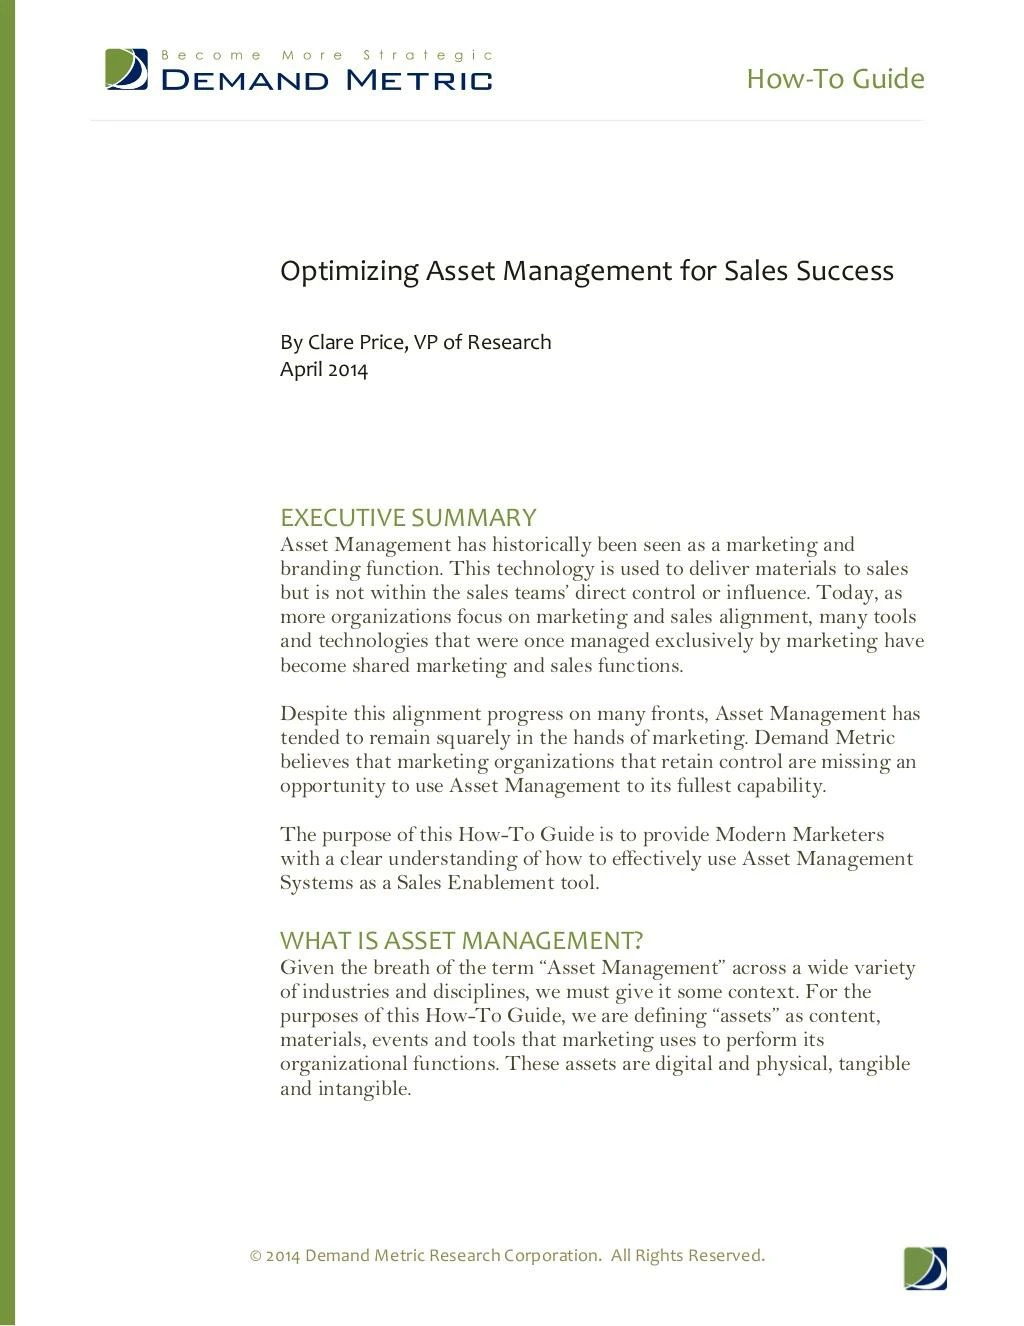 how to guide optimizing asset management for sales success